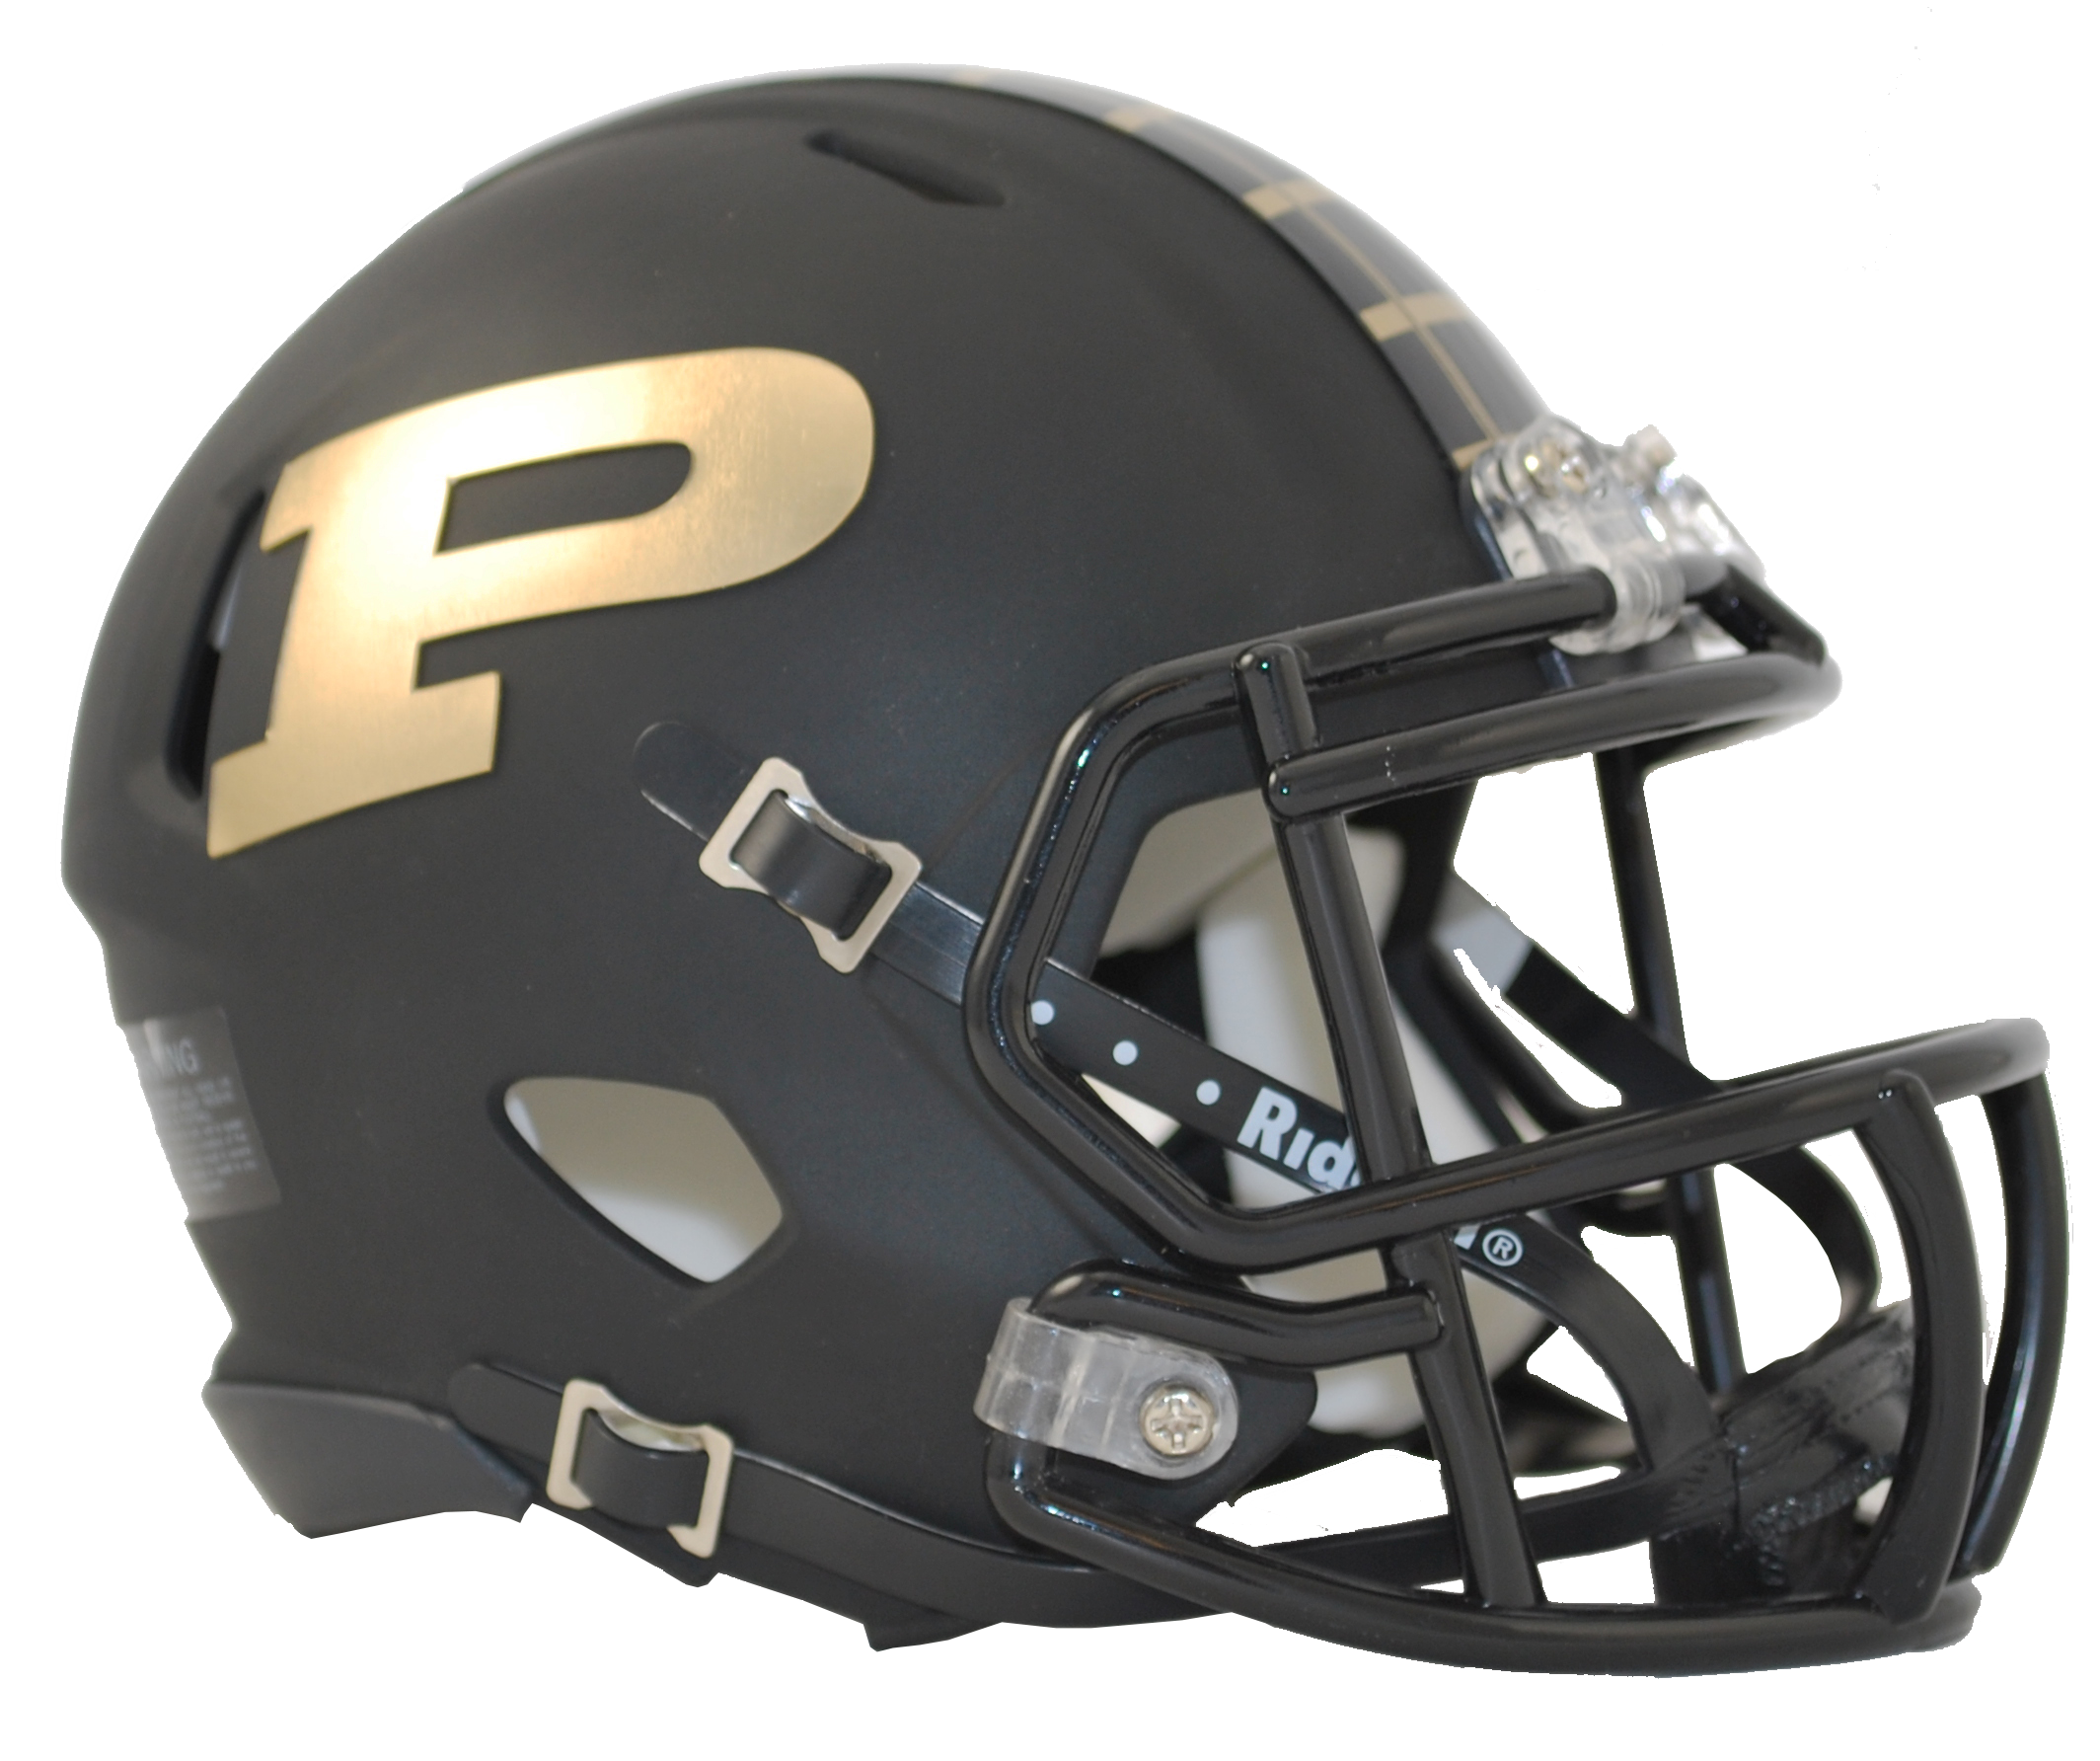 Download American Football Helmet PNG Image for Free